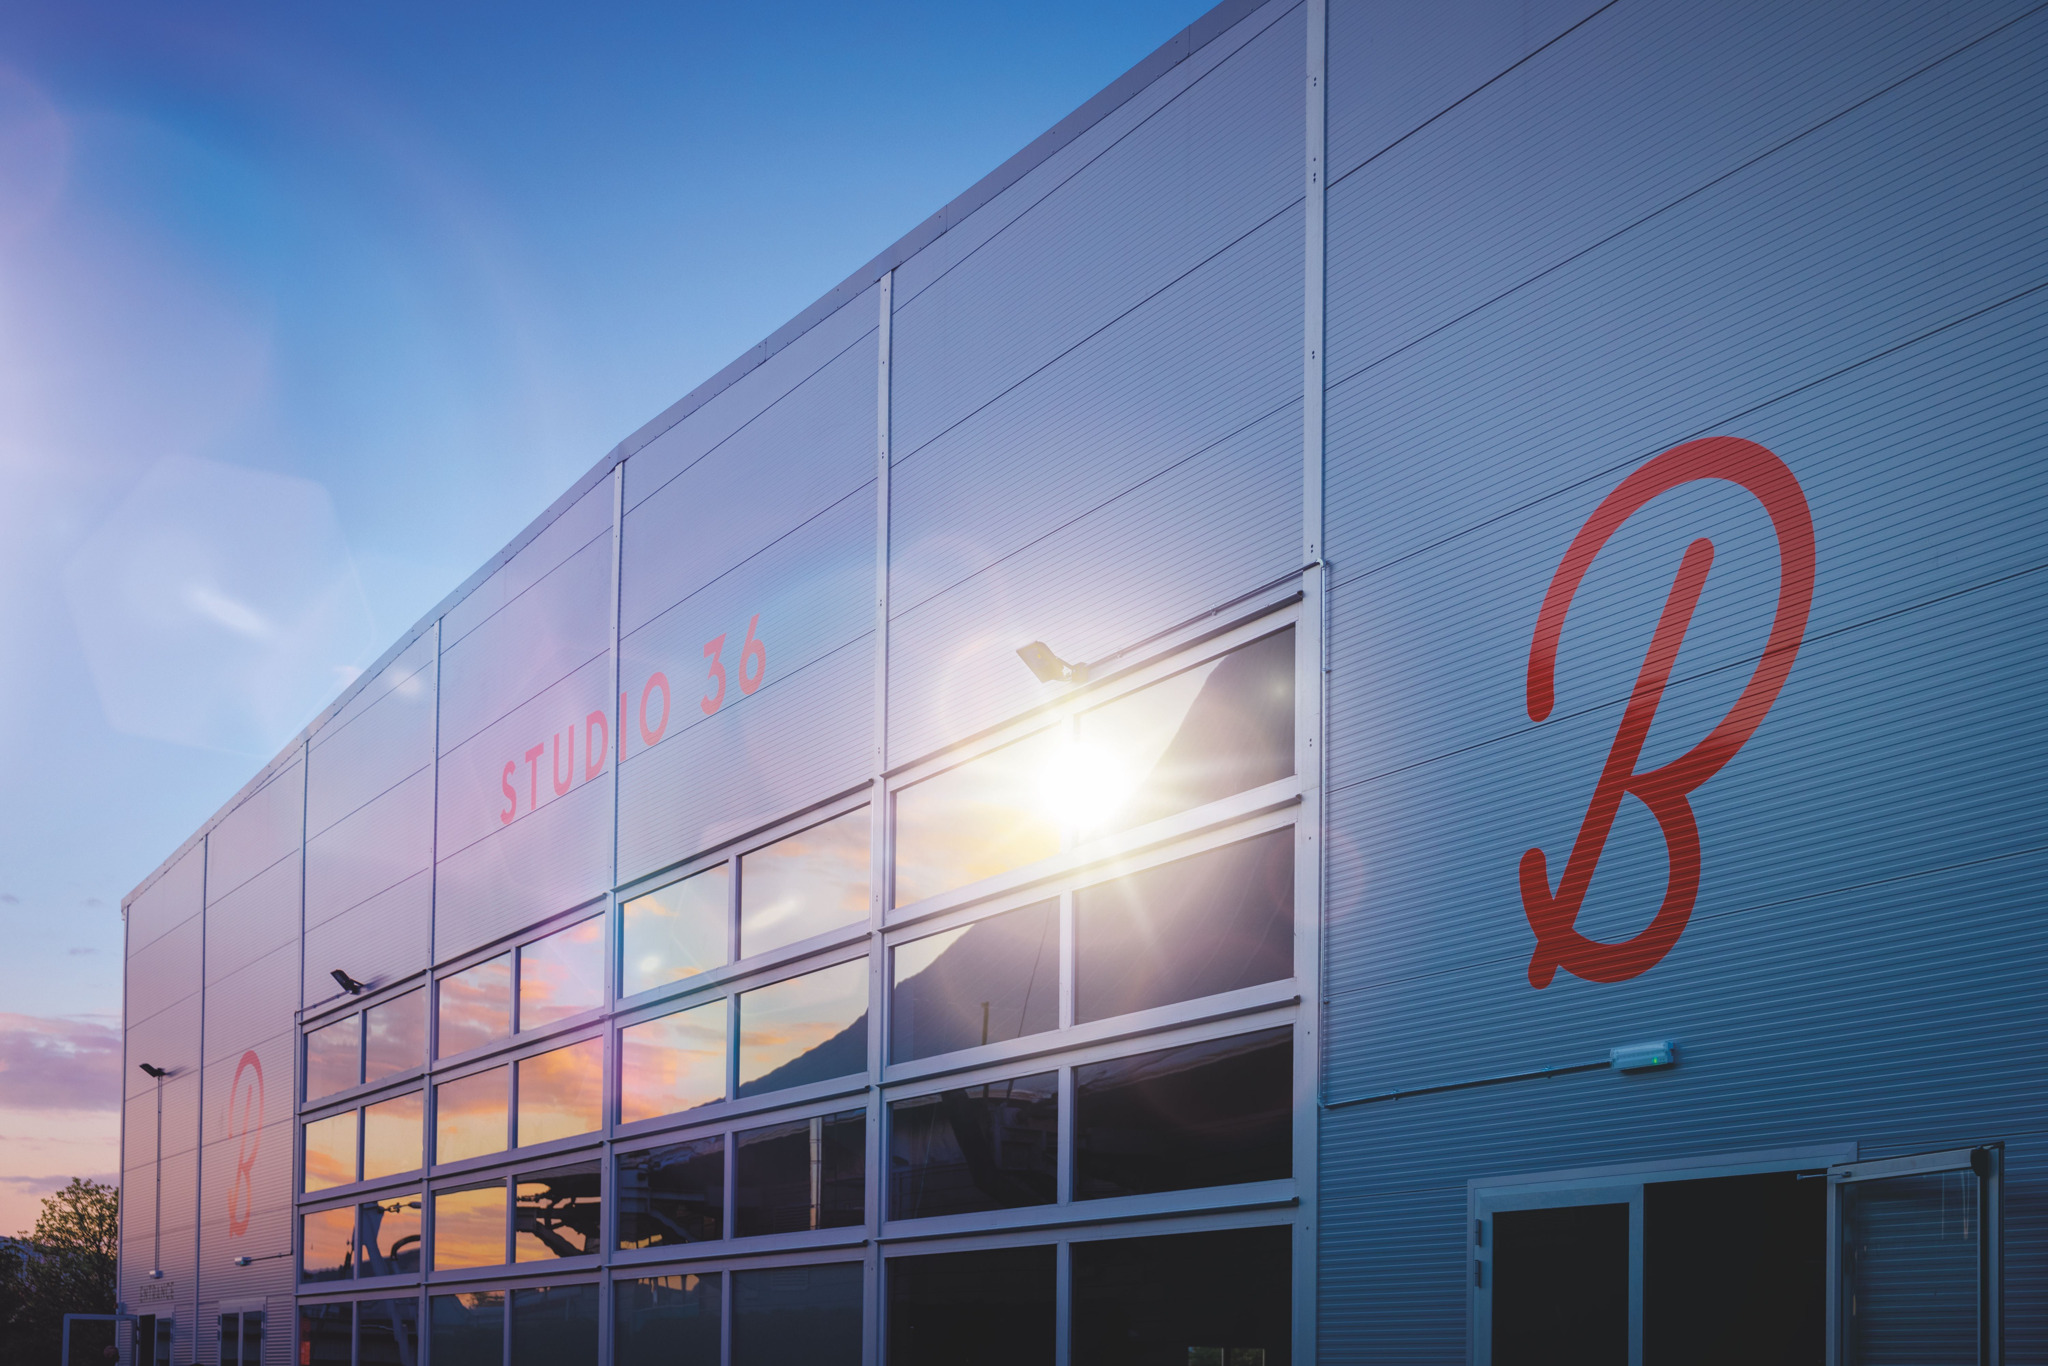 Digital 6000's exceptional audio quality transforms Butlin's resorts into top event and conference destinations